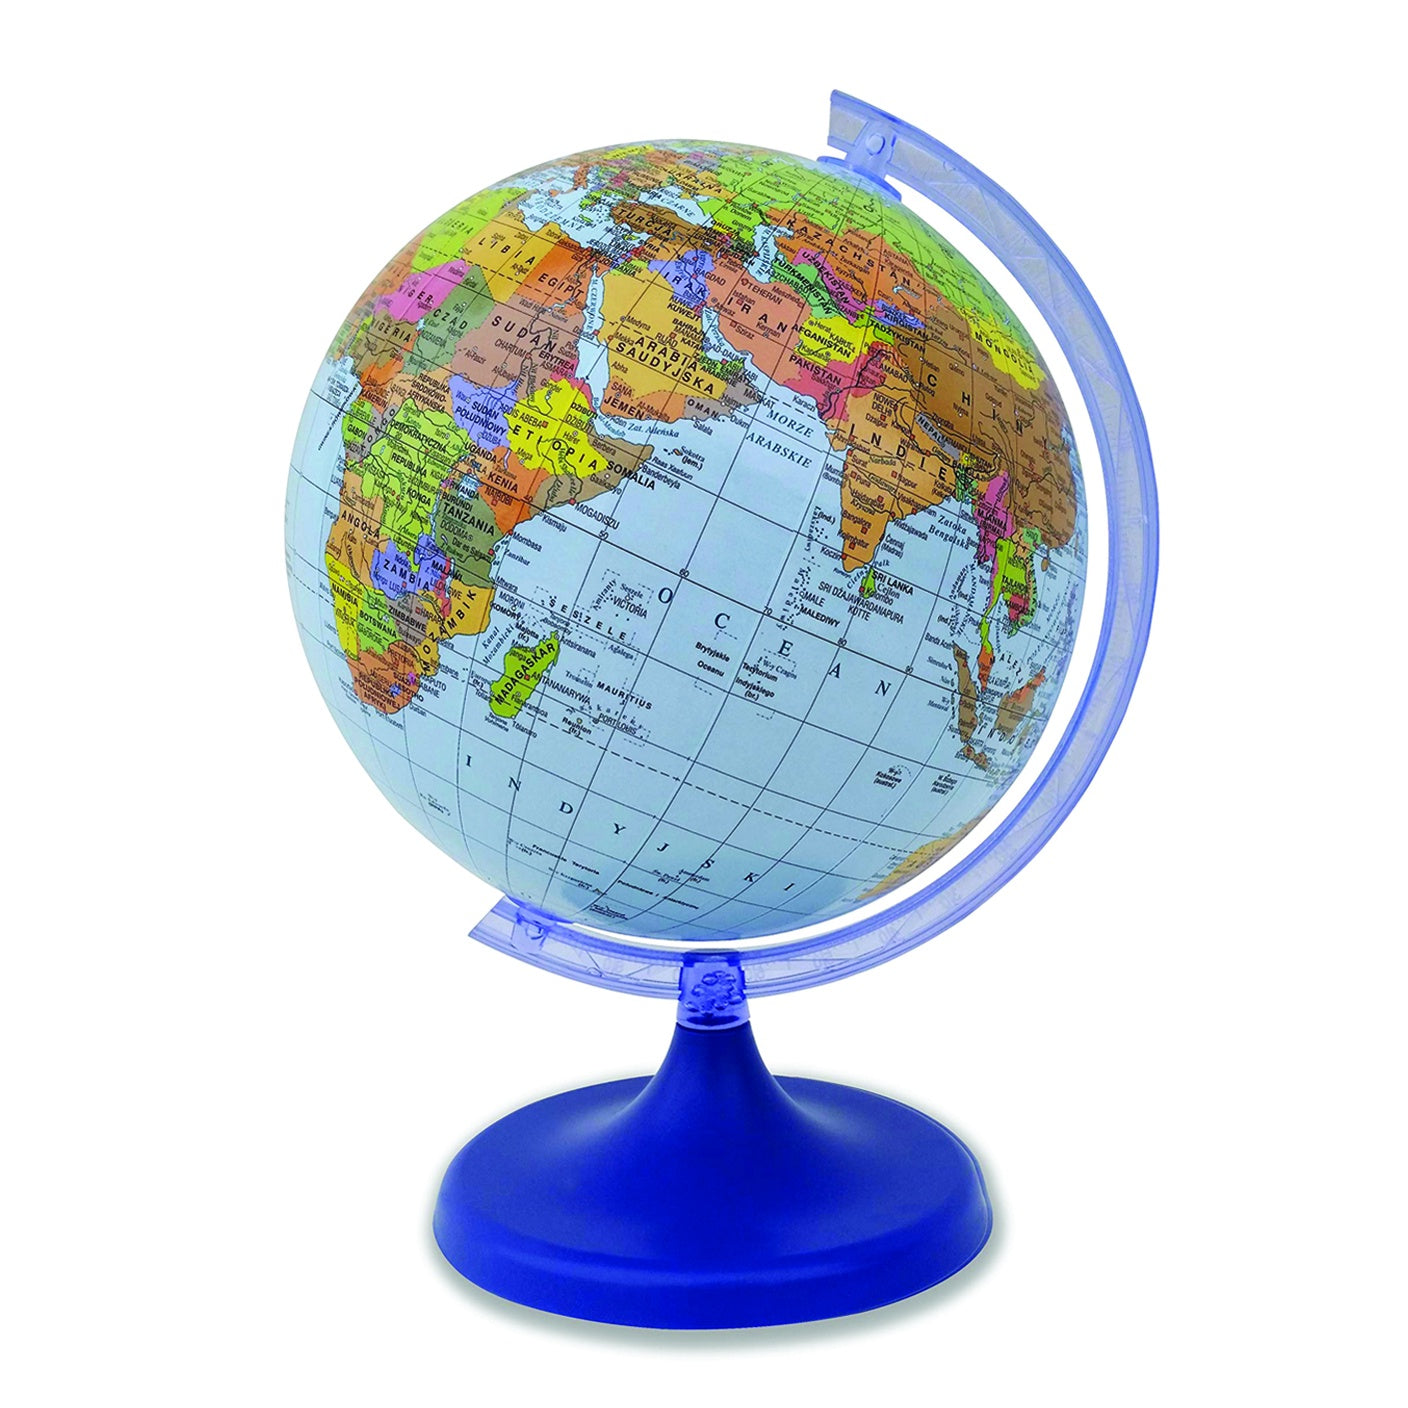 Deer Industries Globe, World Globe, Medium Blue Earth, Insight Guides, World Map, Gifts for Kids, Educational Toys